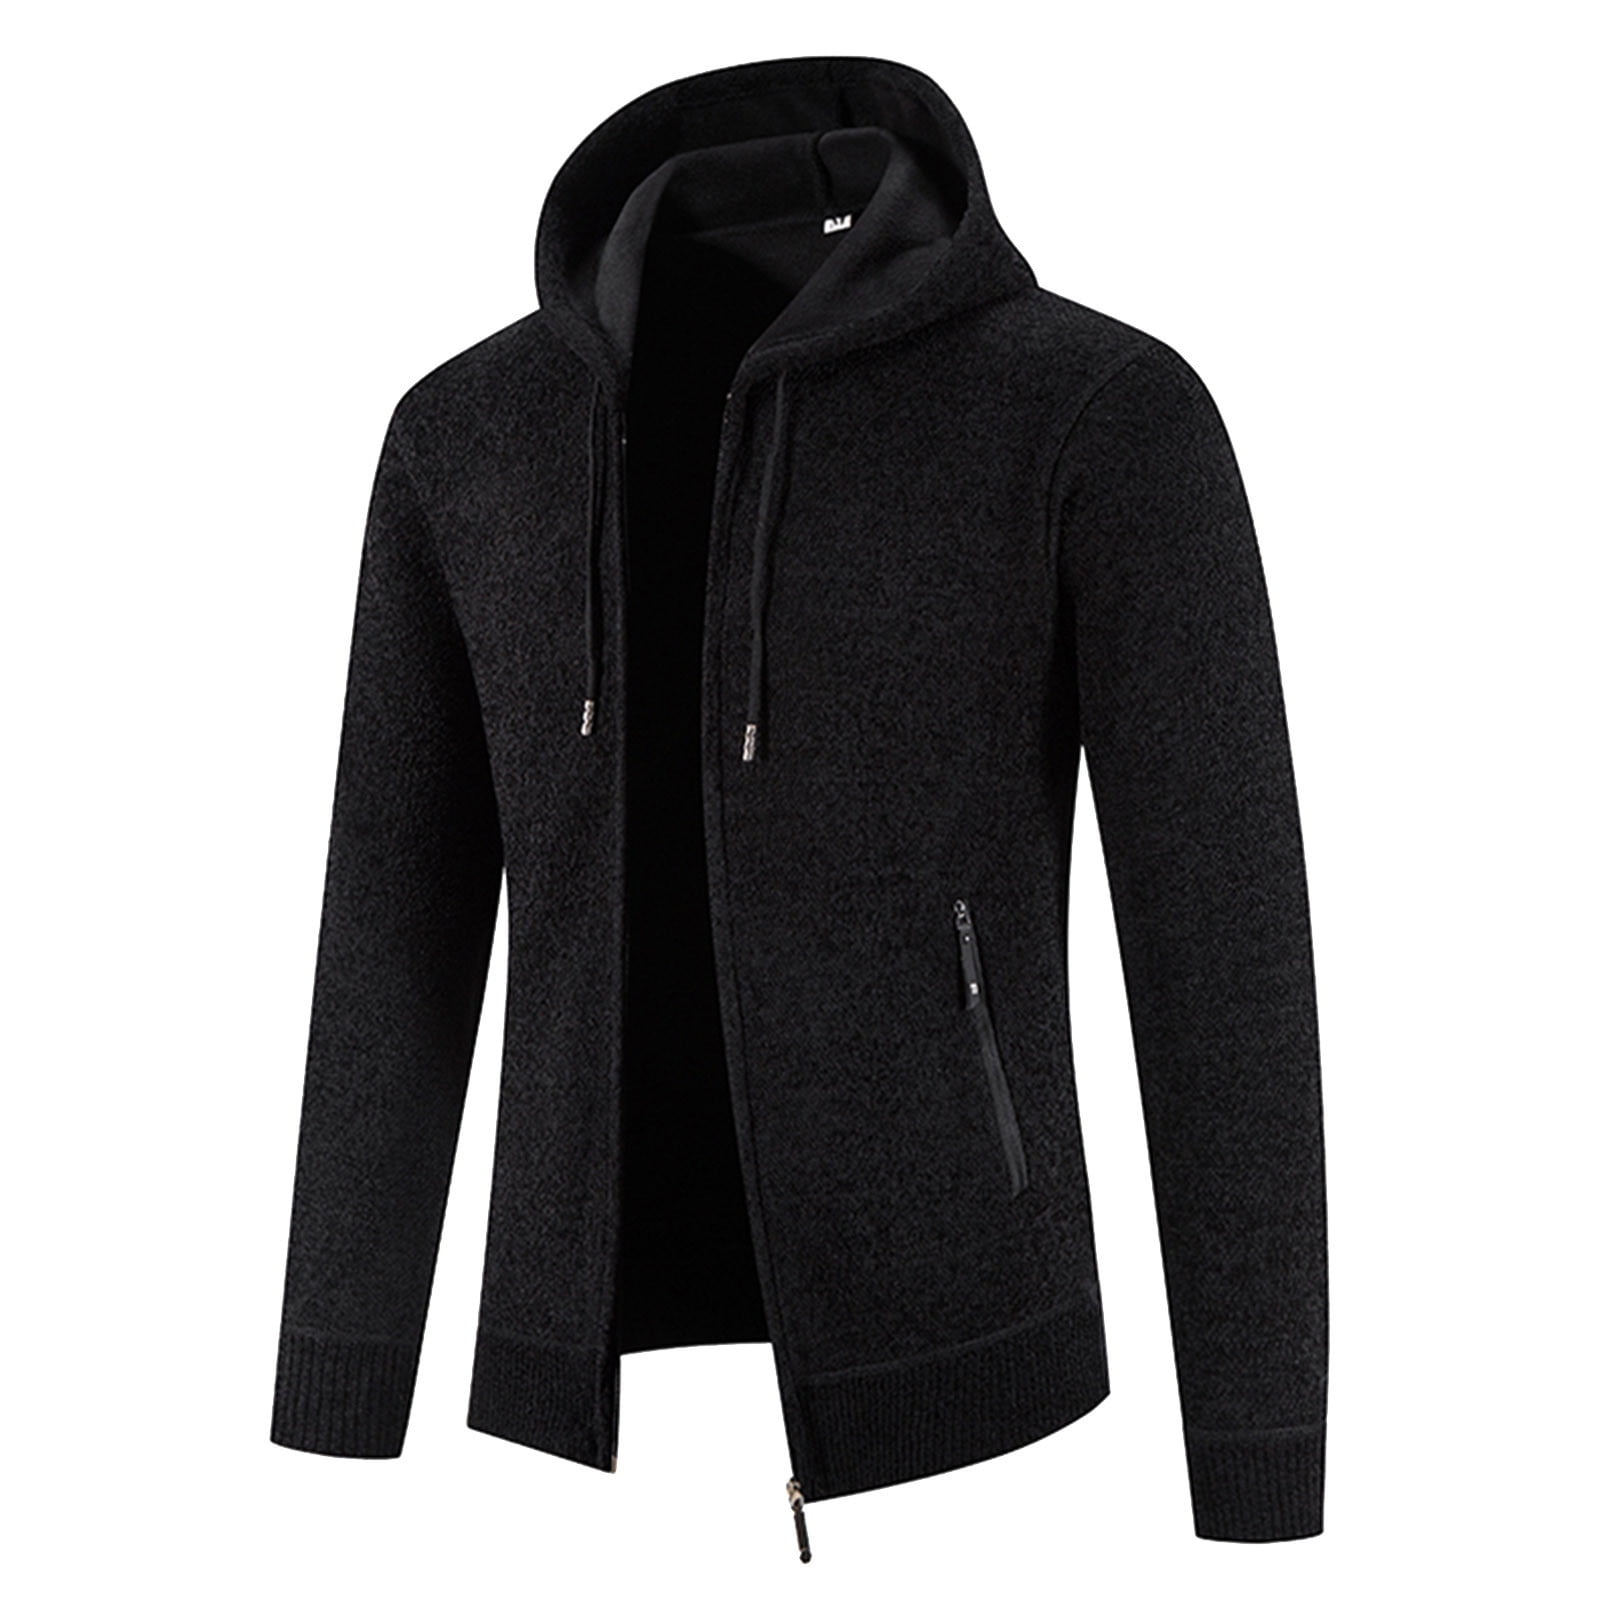 Pgeraug hoodies for men Solid Hooded Zipper Warm Cardigan Knitted Coat ...